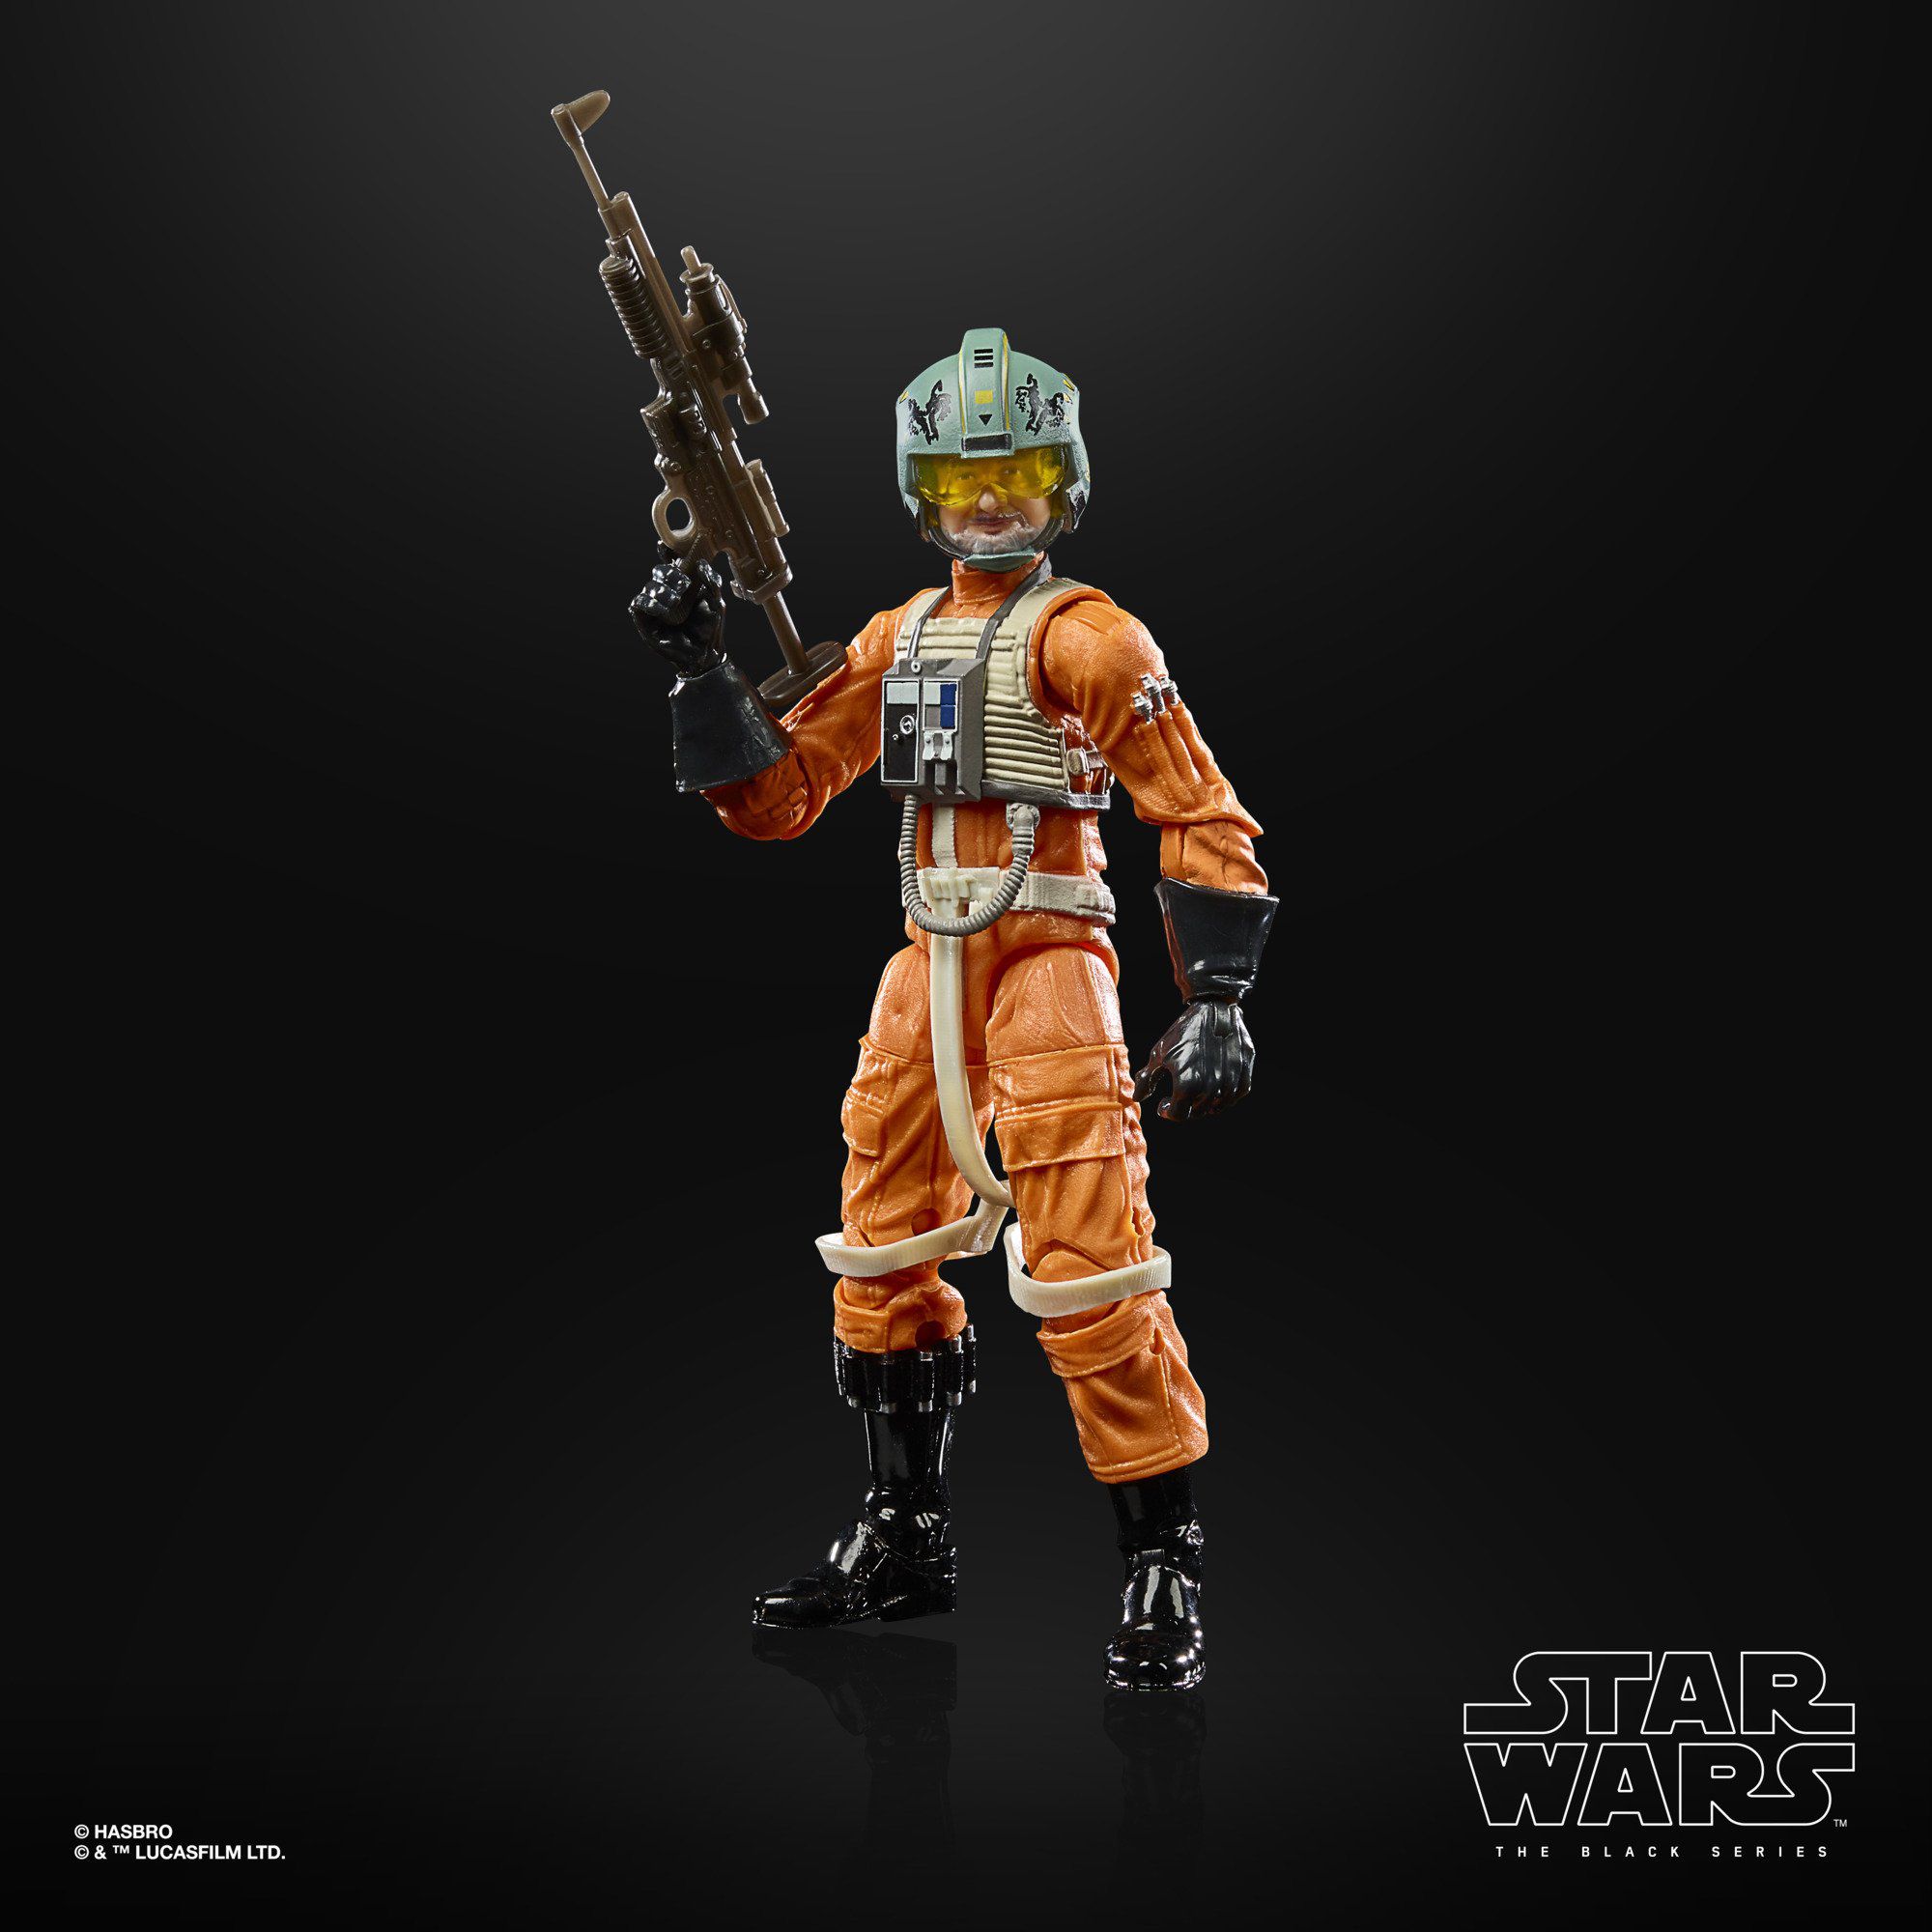 Trapper Wolf Star Wars Action Figure image #4